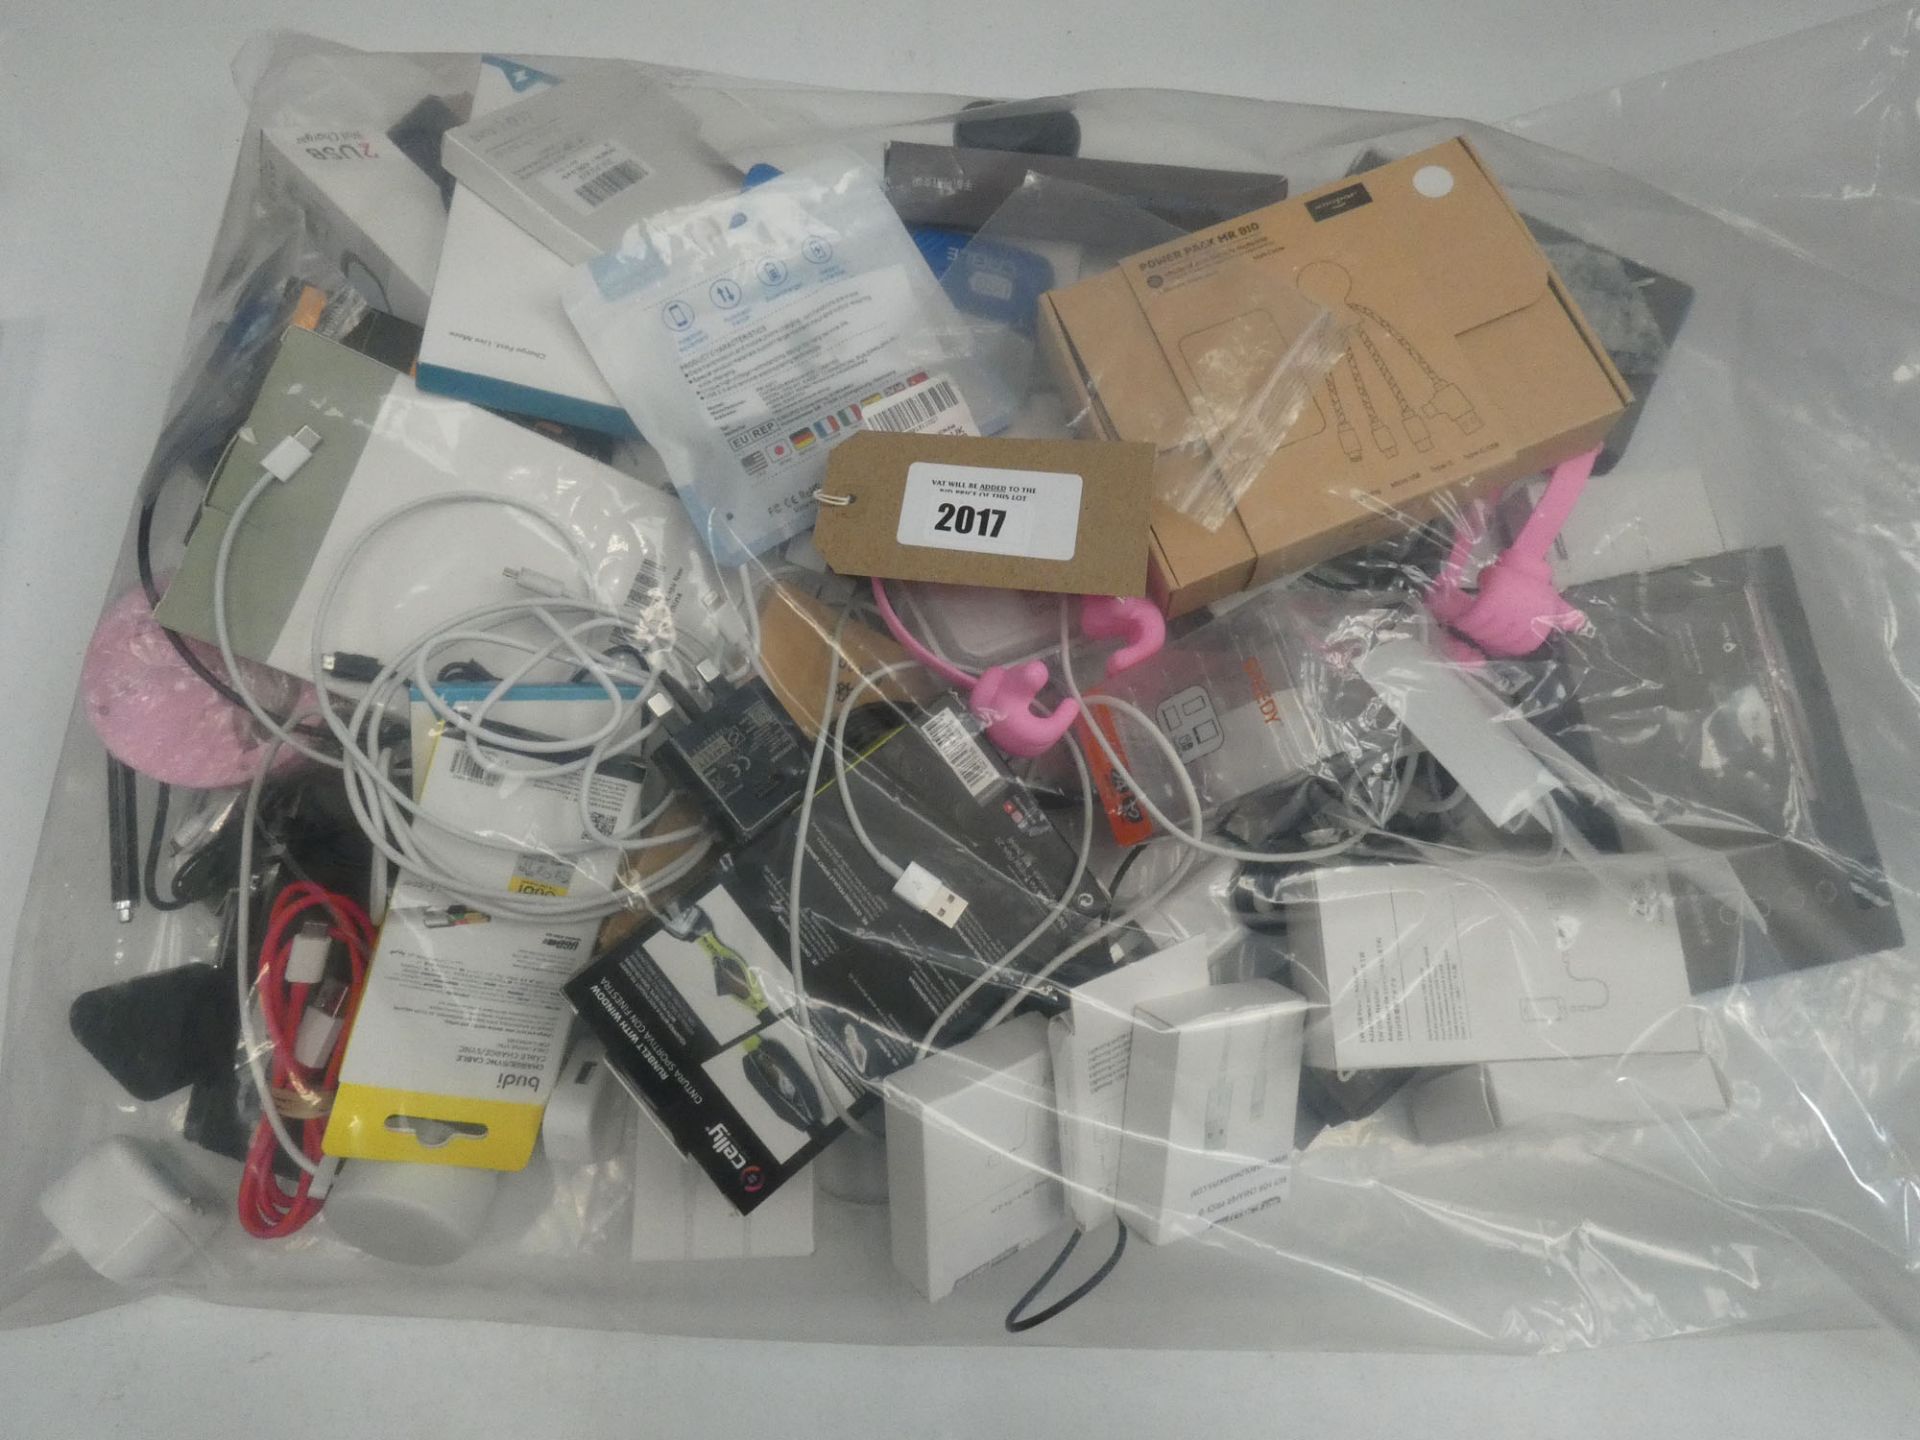 Bag containing quantity of mobile phone accessories; leads, adapters, chargers, earphones, etc